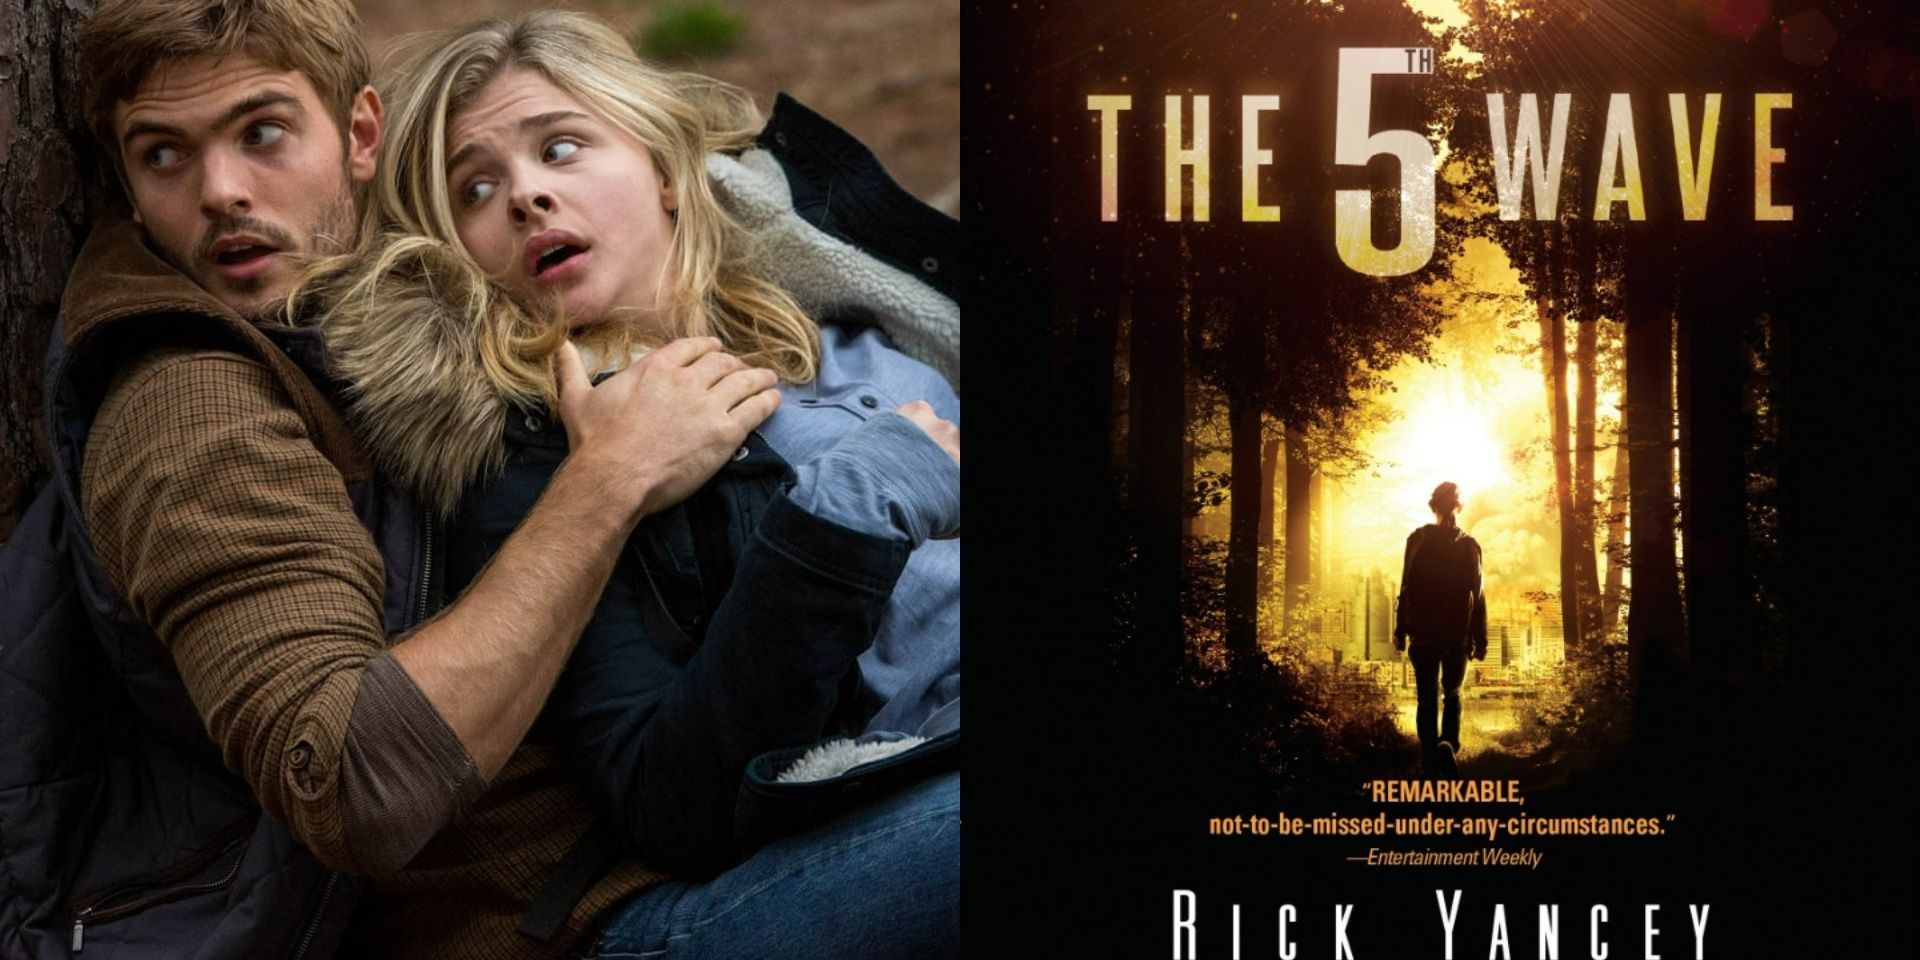 (Left) Evan holding Cassie behind tree / (Right) The 5th Wave book cover